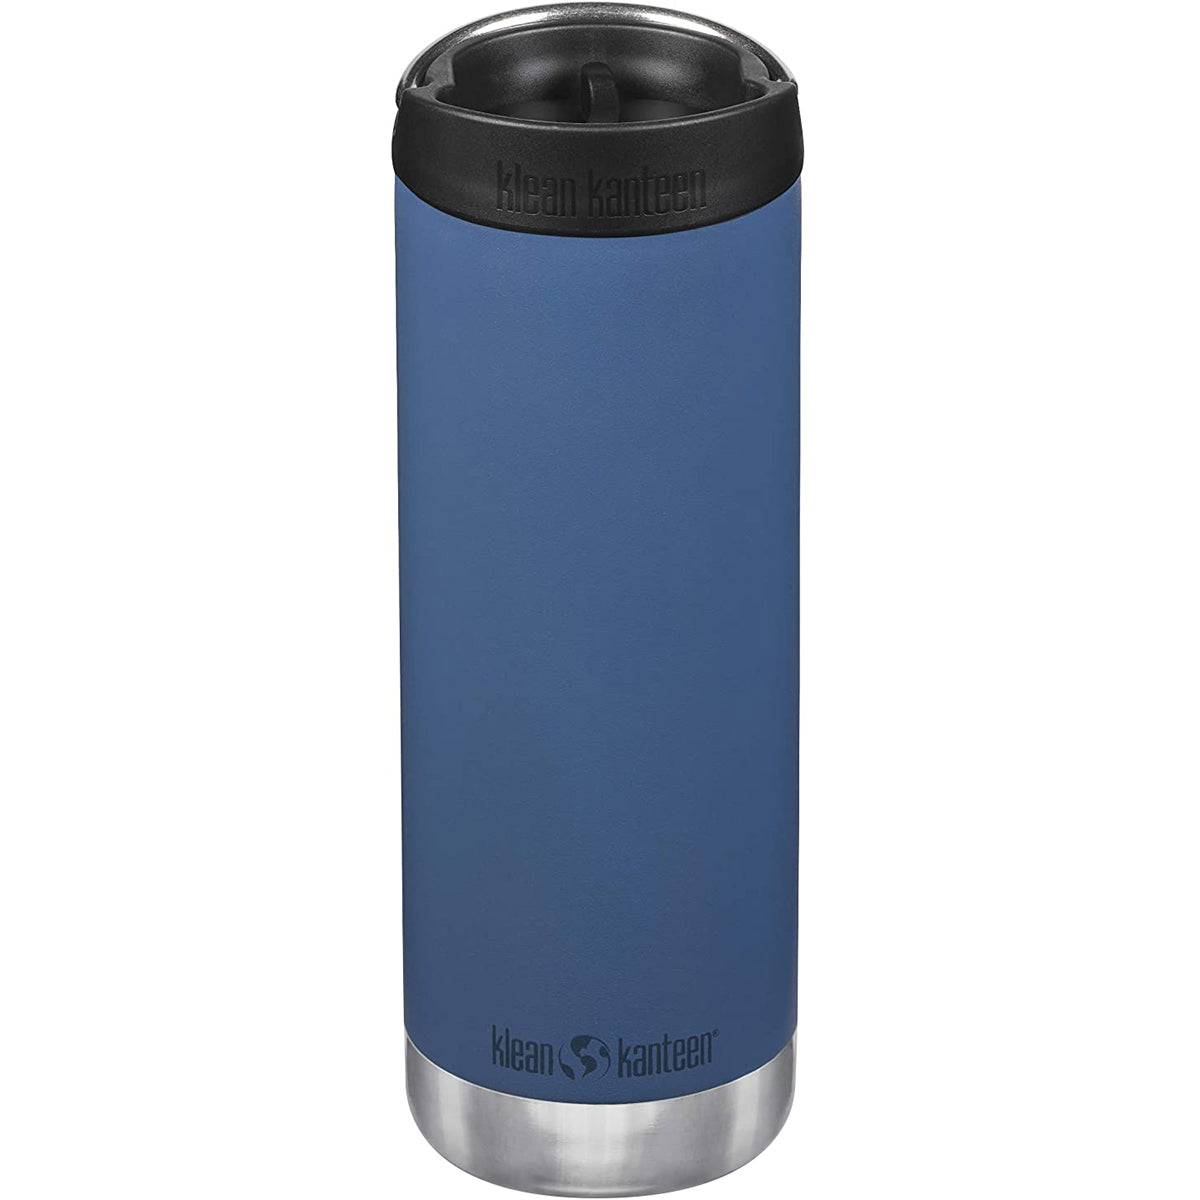 Klean Kanteen 16 oz. TKWide Insulated Stainless Steel Bottle with Cafe Cap Klean Kanteen